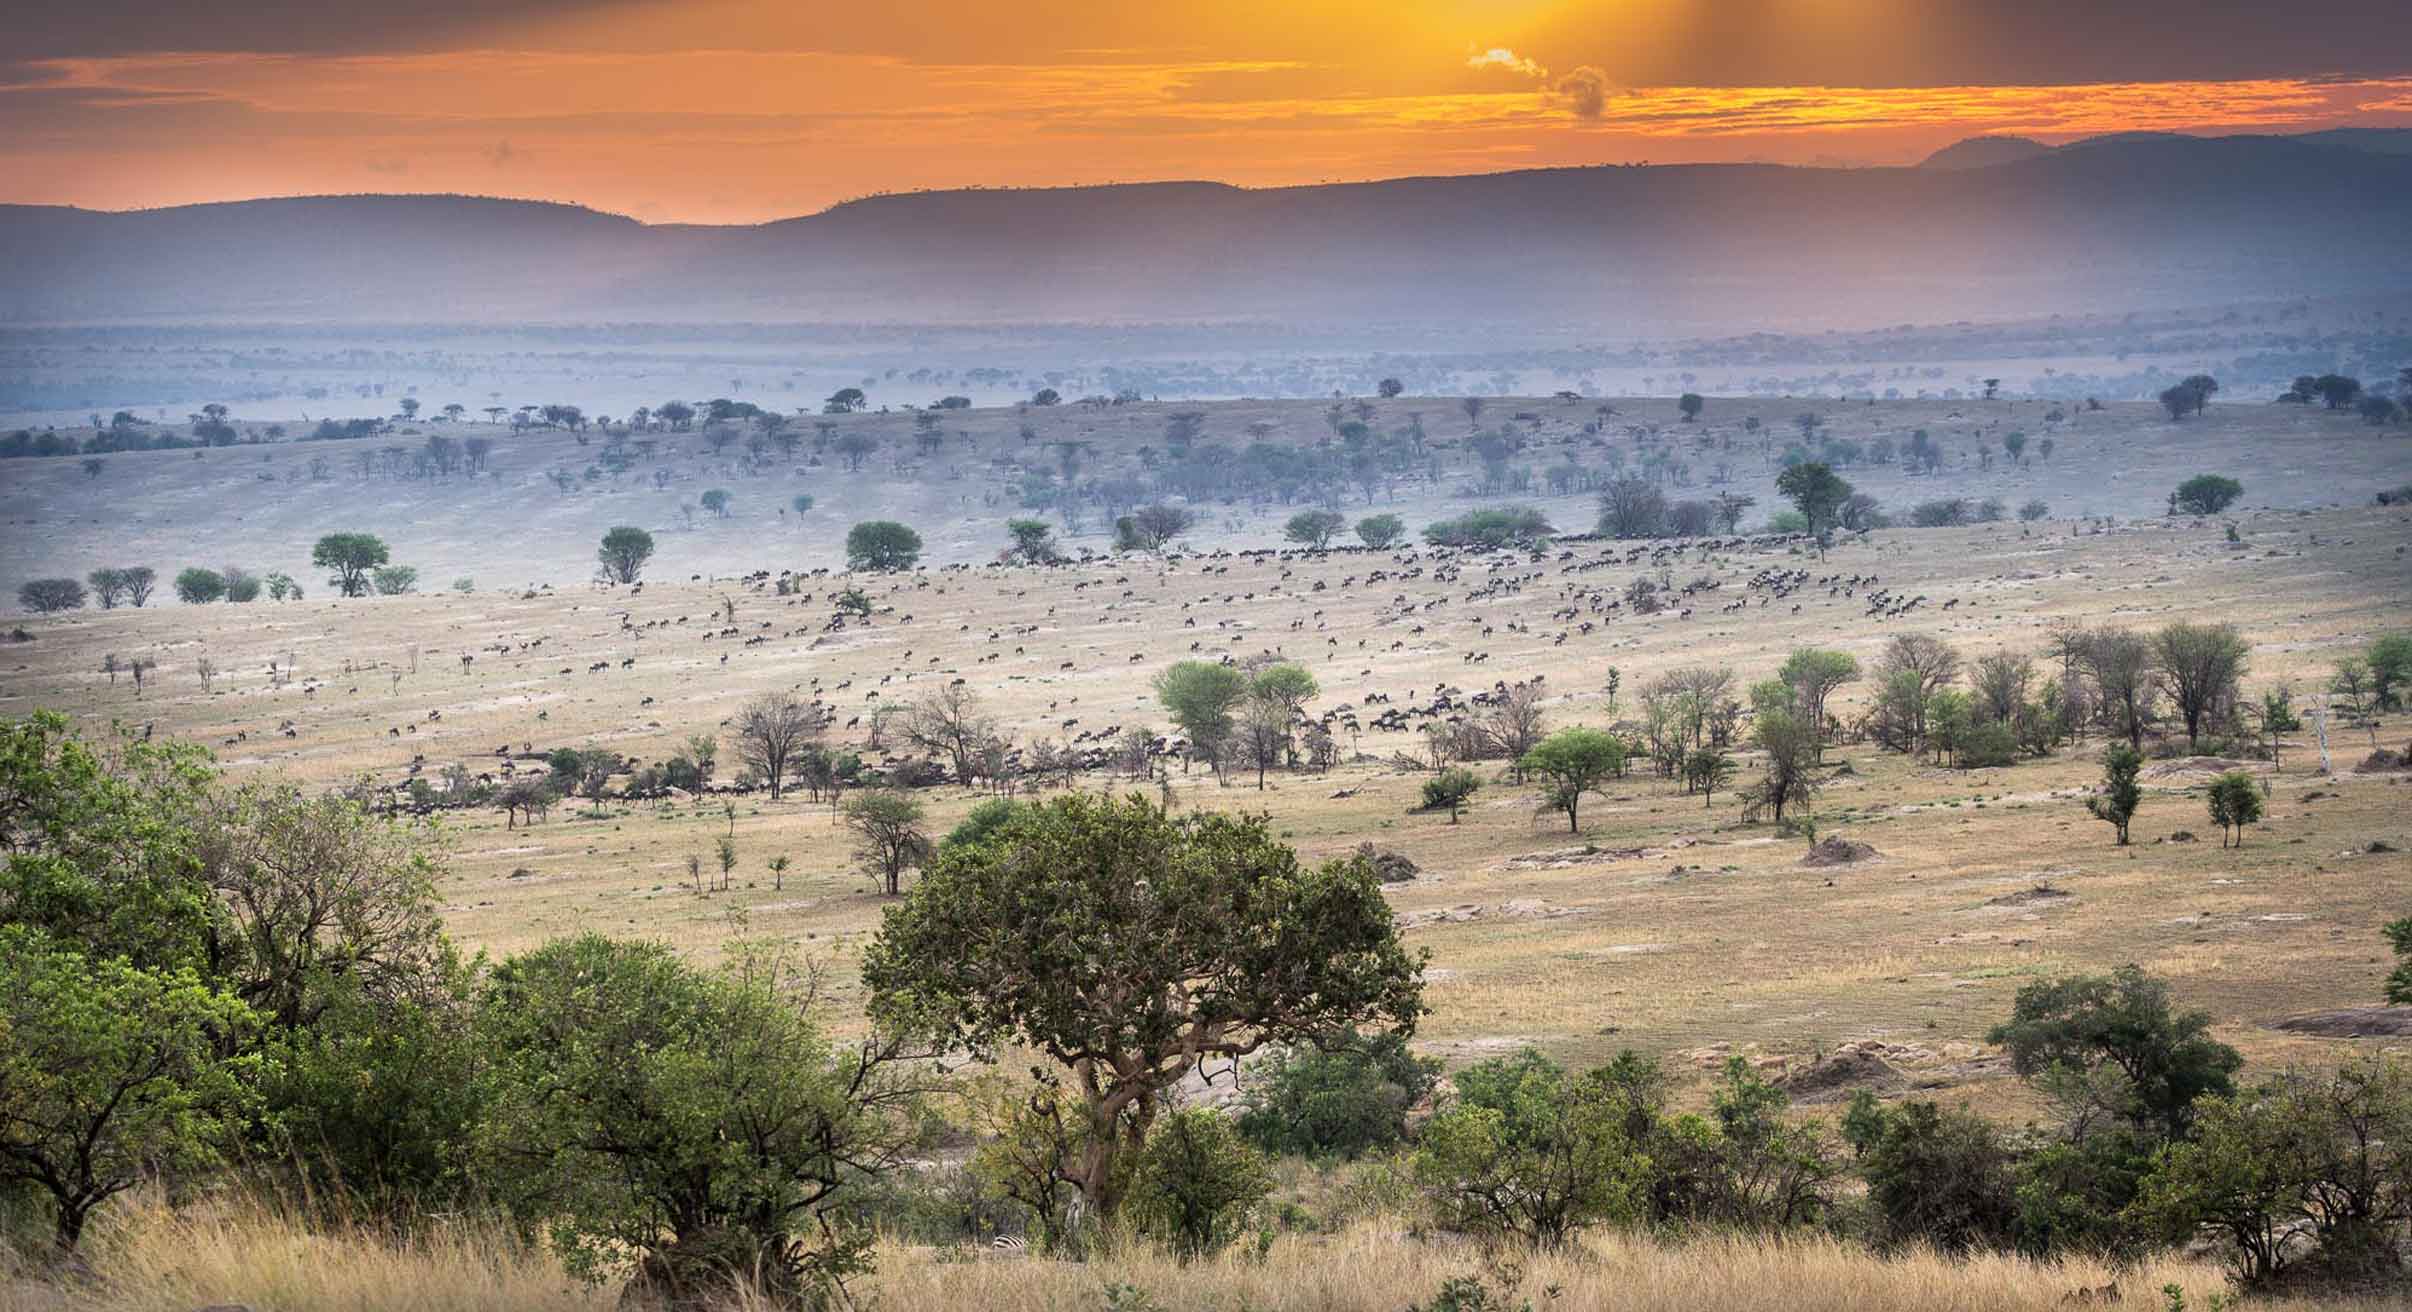 View of the Serengeti in Tanzania at sunset during Great Migration